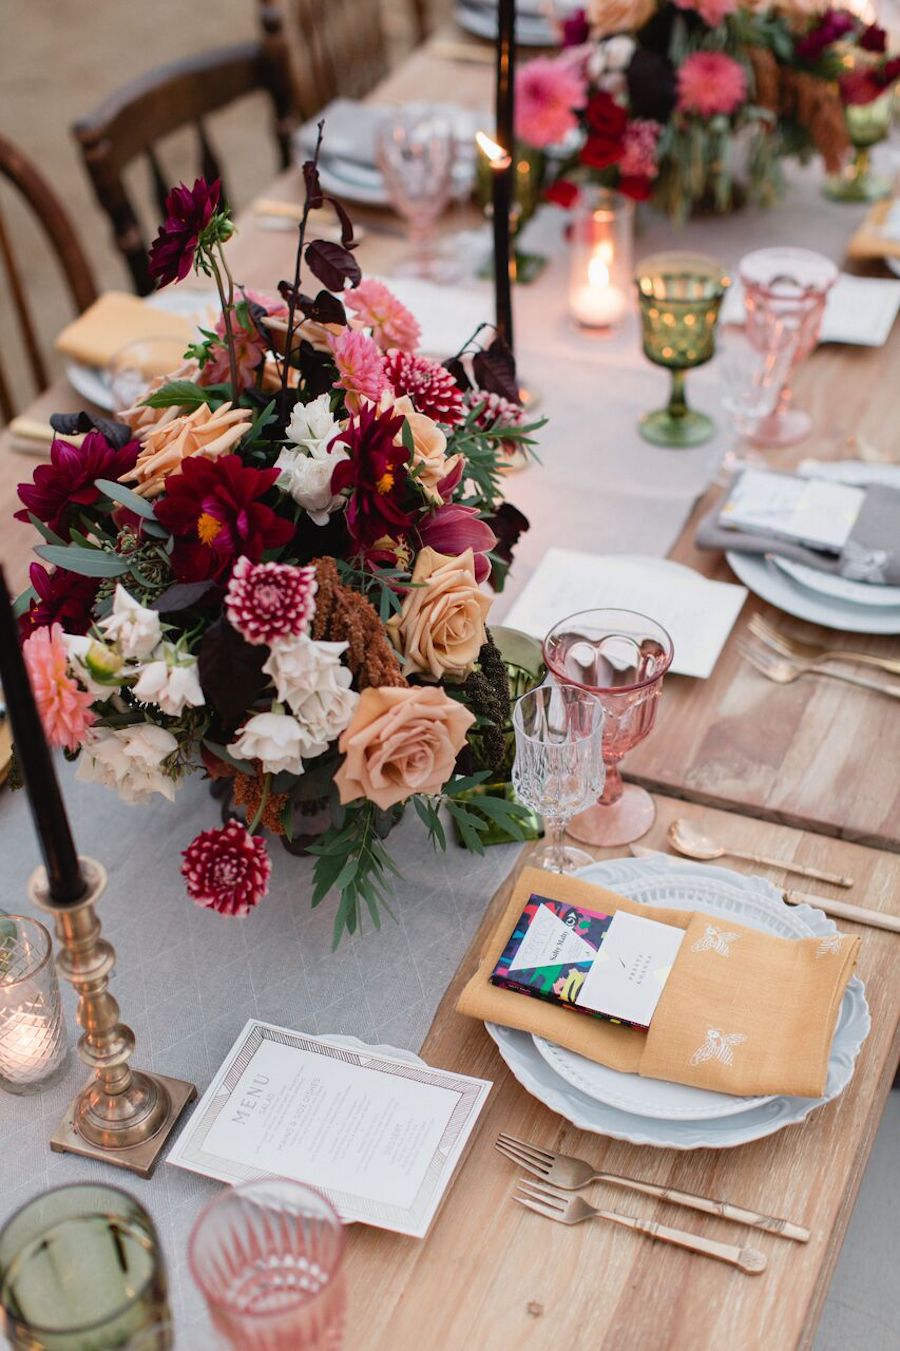 Burgundy Wedding Ideas That Will Take Your Breath Away - Belle The Magazine